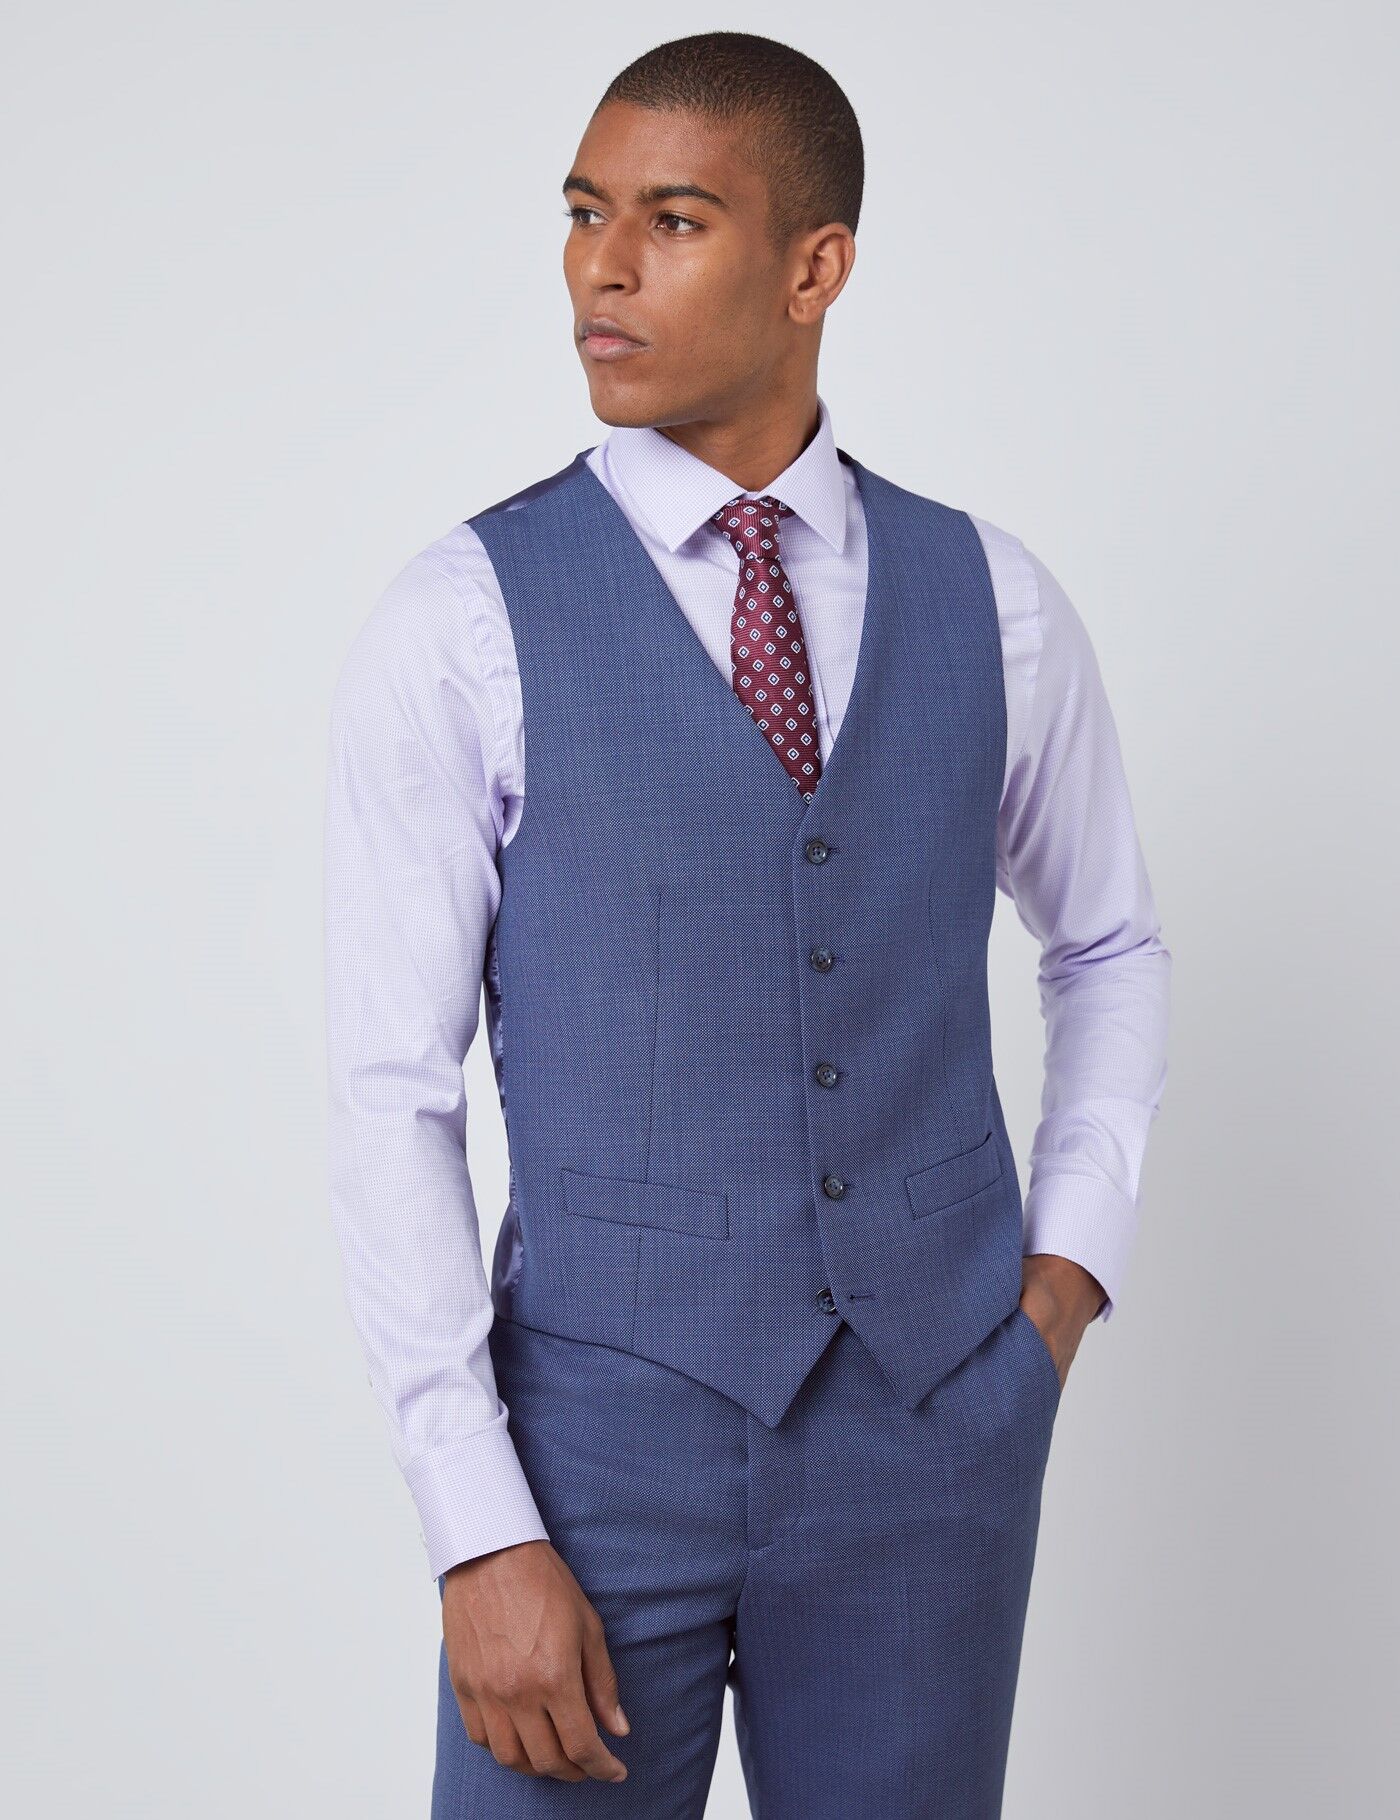 Hawes & Curtis Men's Tailored Fit Italian Waistcoat in Dark Blue   Size 40   1913 Collection   Wool   Hawes & Curtis